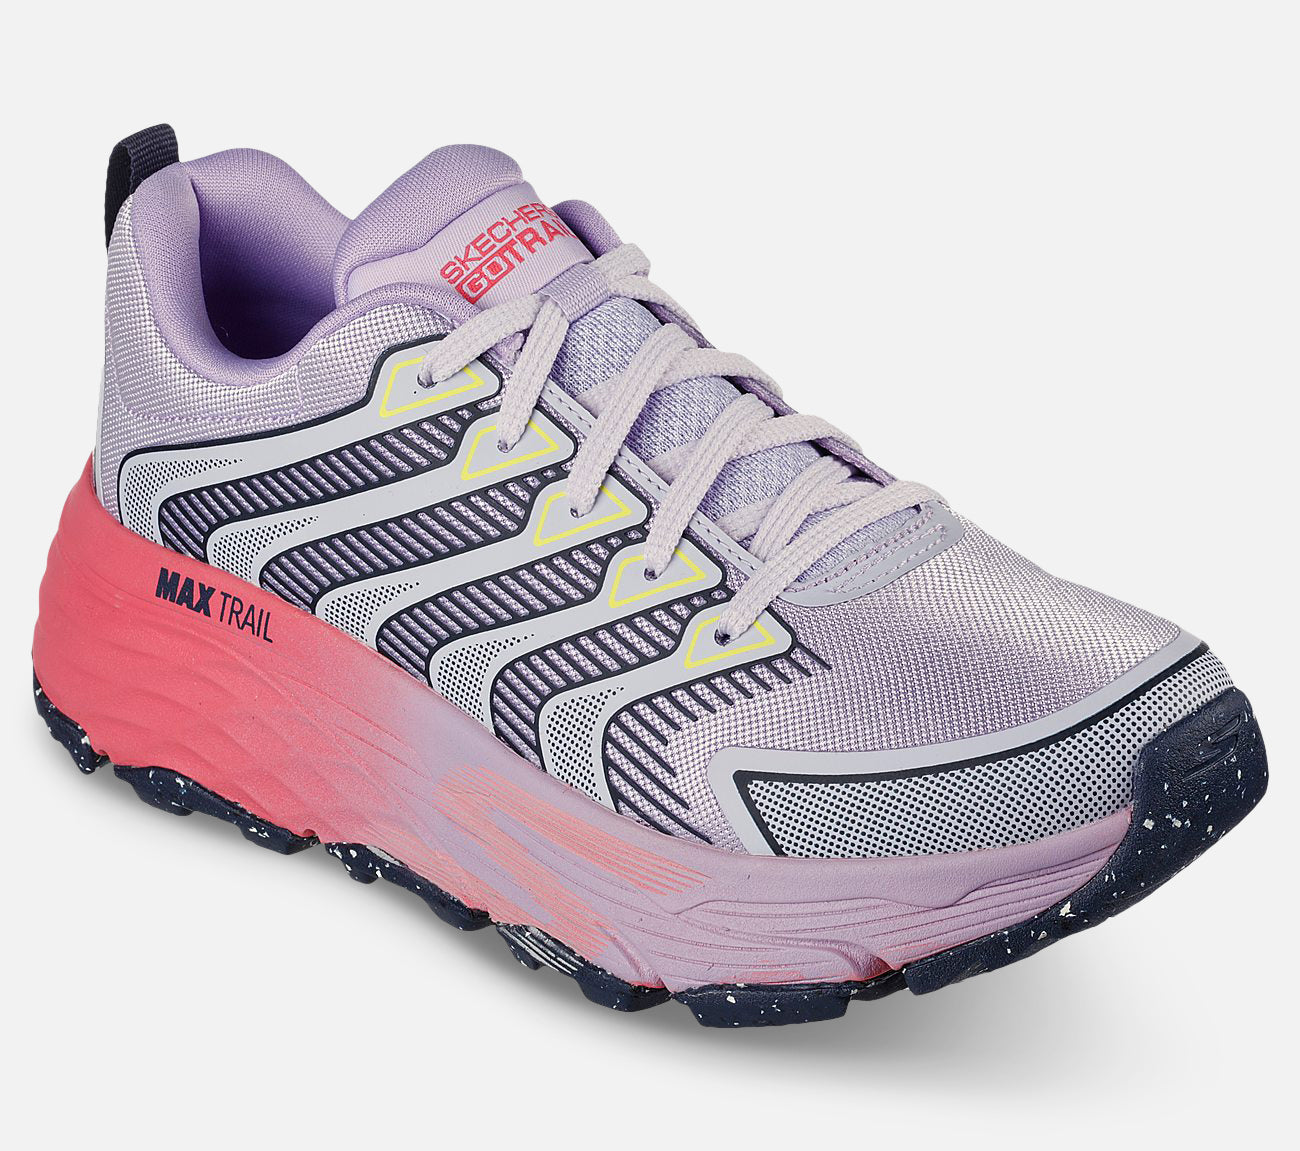 Max Cushioning Elite Trail - Water Repellent